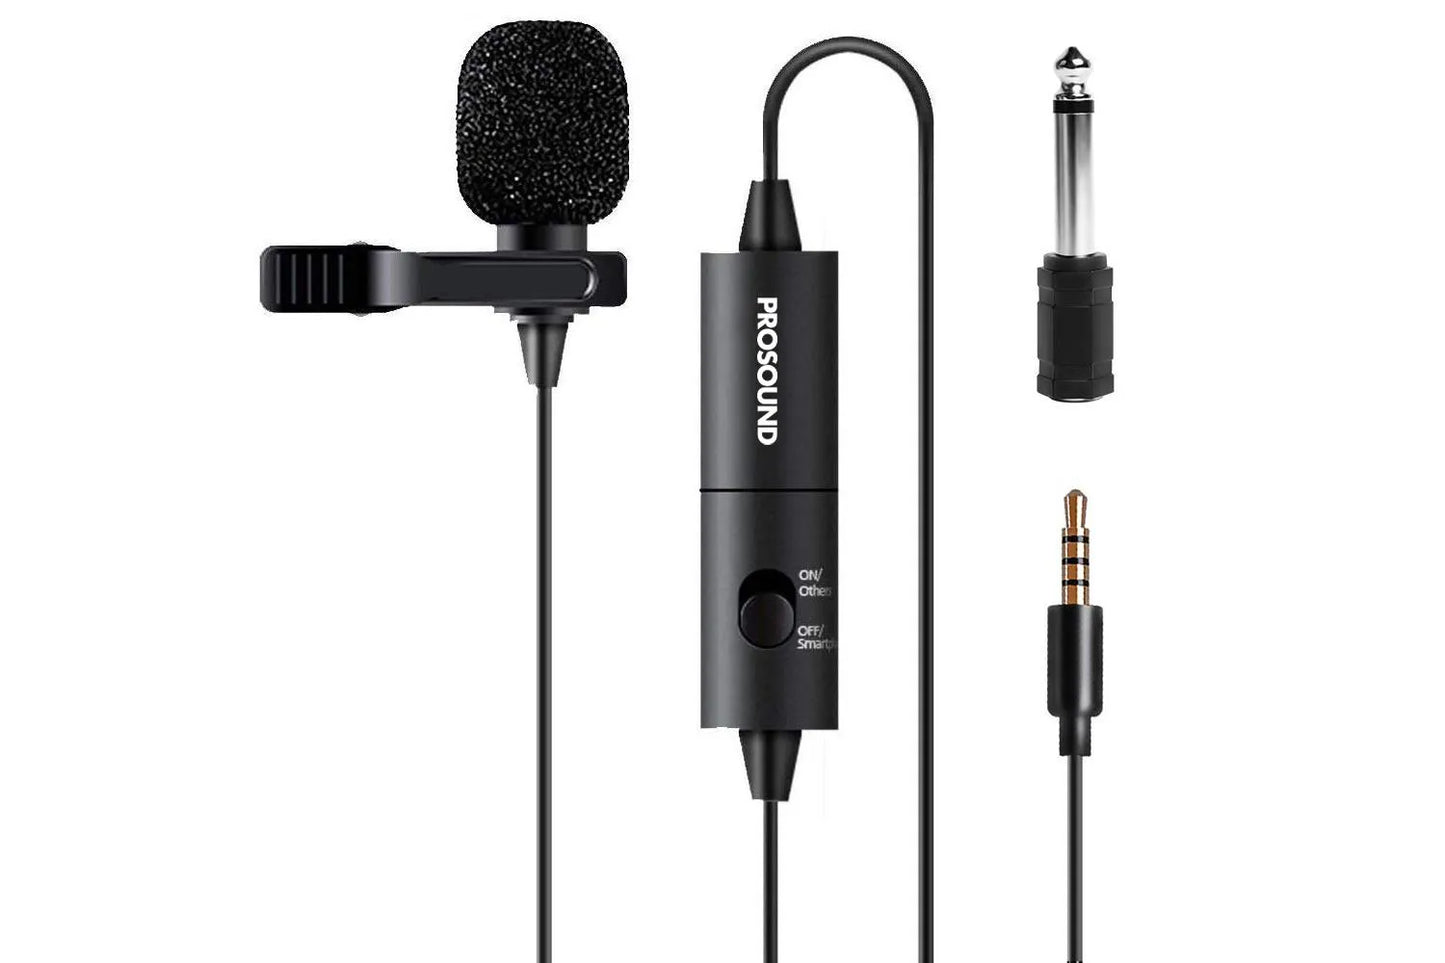 ProSound Lavalier Lapel Omnidirectional 3.5mm 4 Pole Jack Microphone with 0.25" Adapter